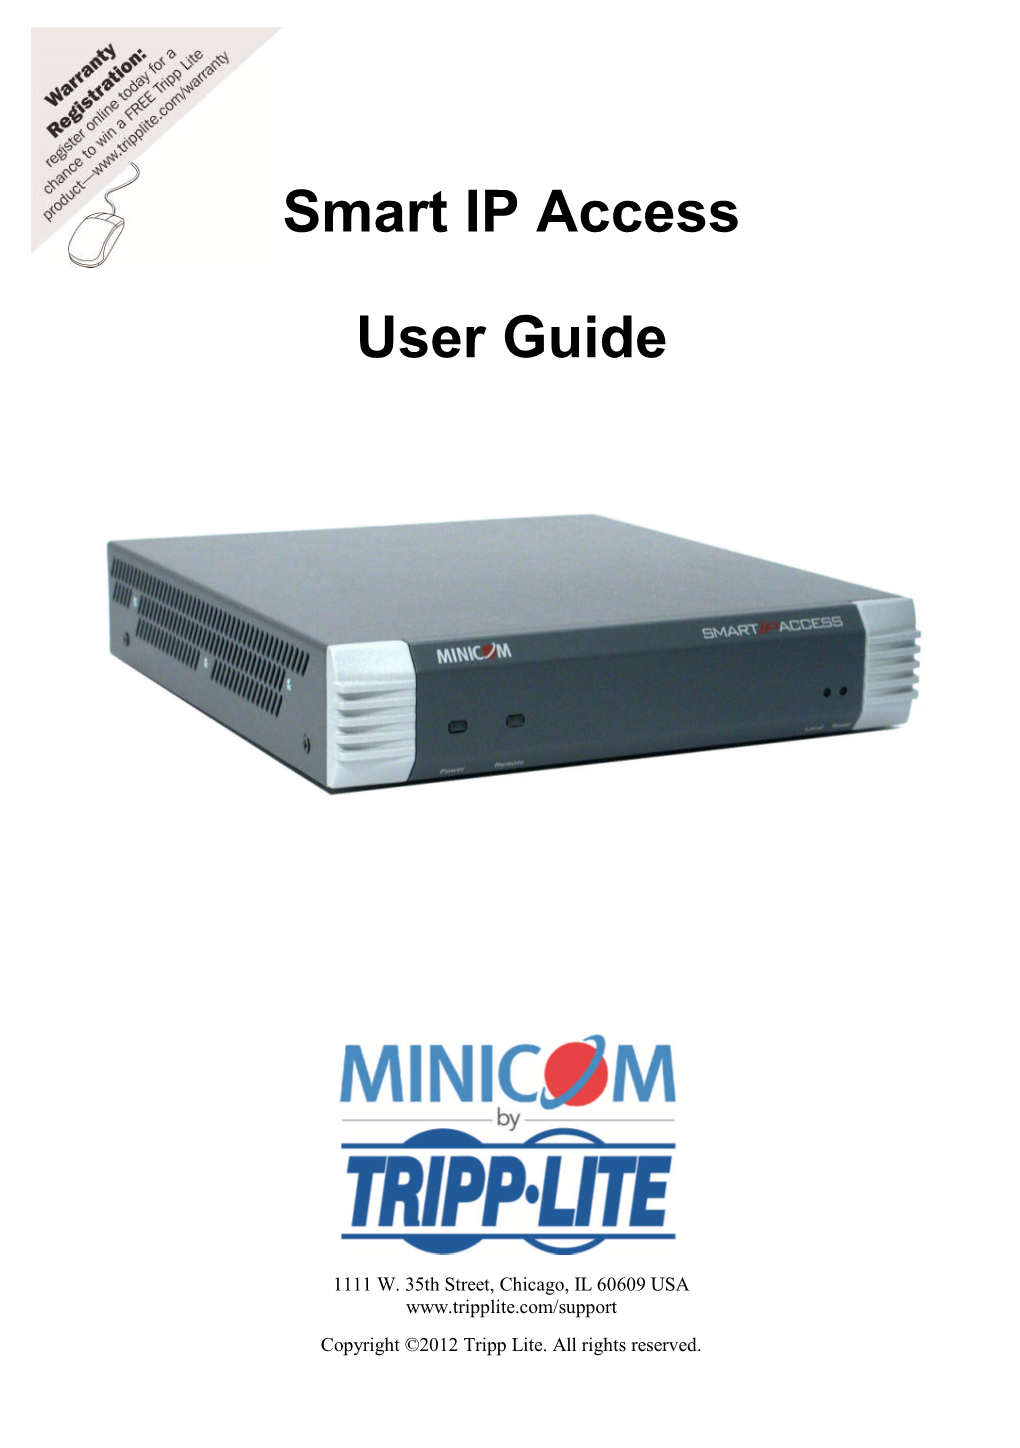 Smart IP Access User Guide